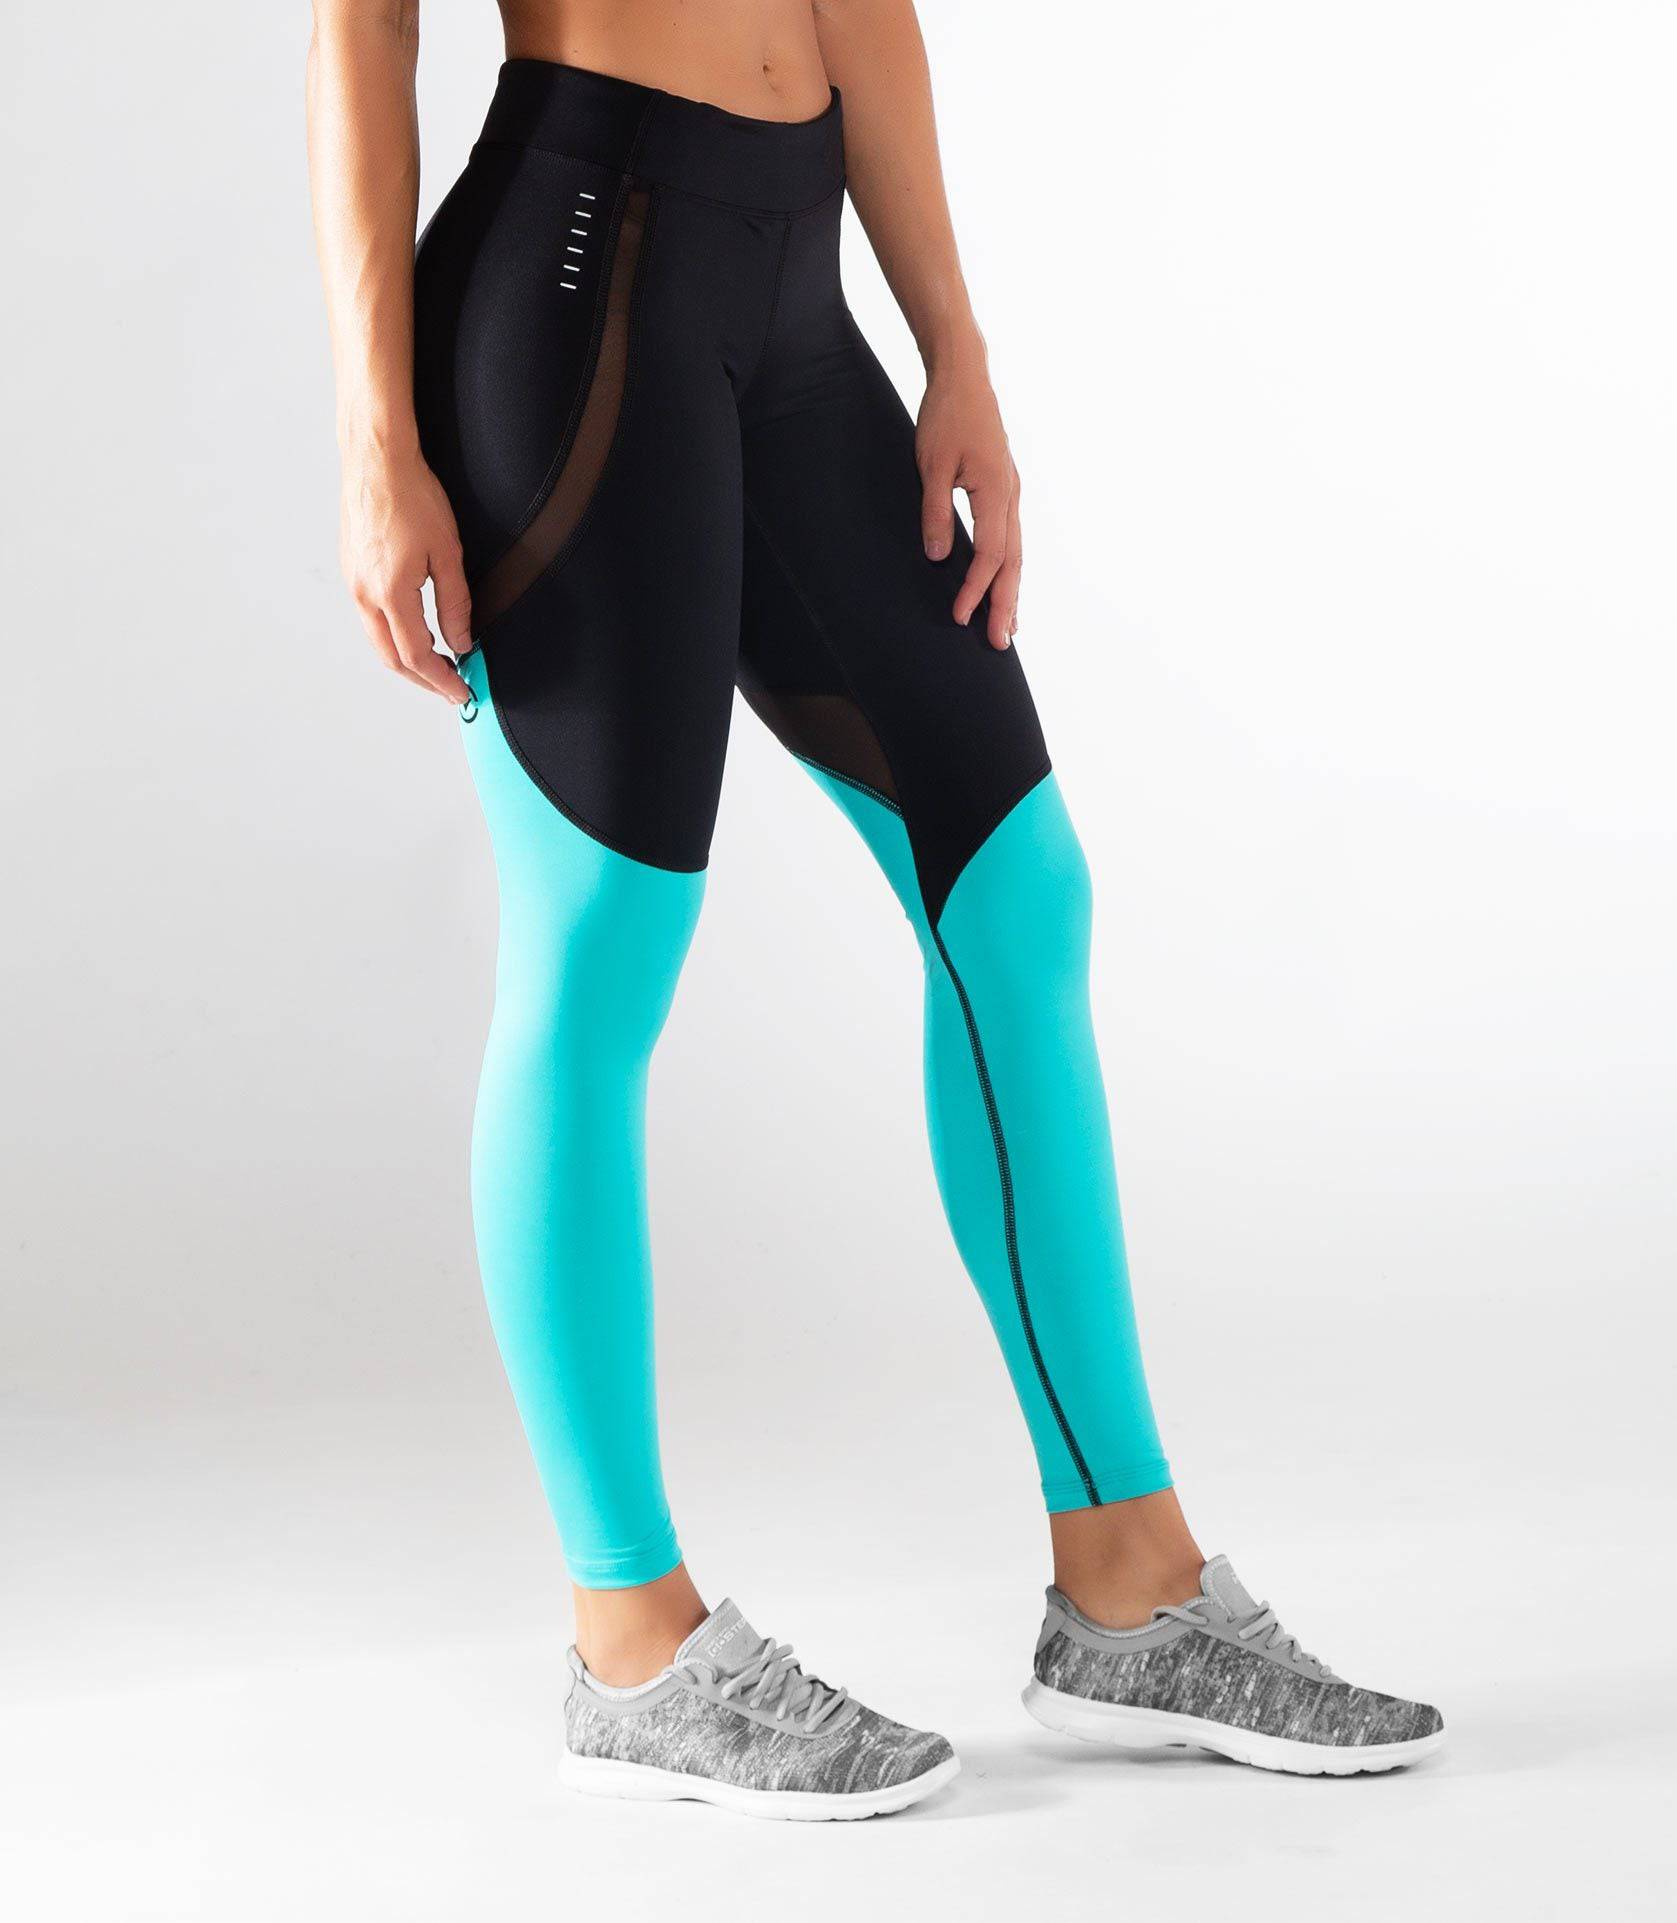 Women's Eco21.5 Compression Tech Pant. Available now in our